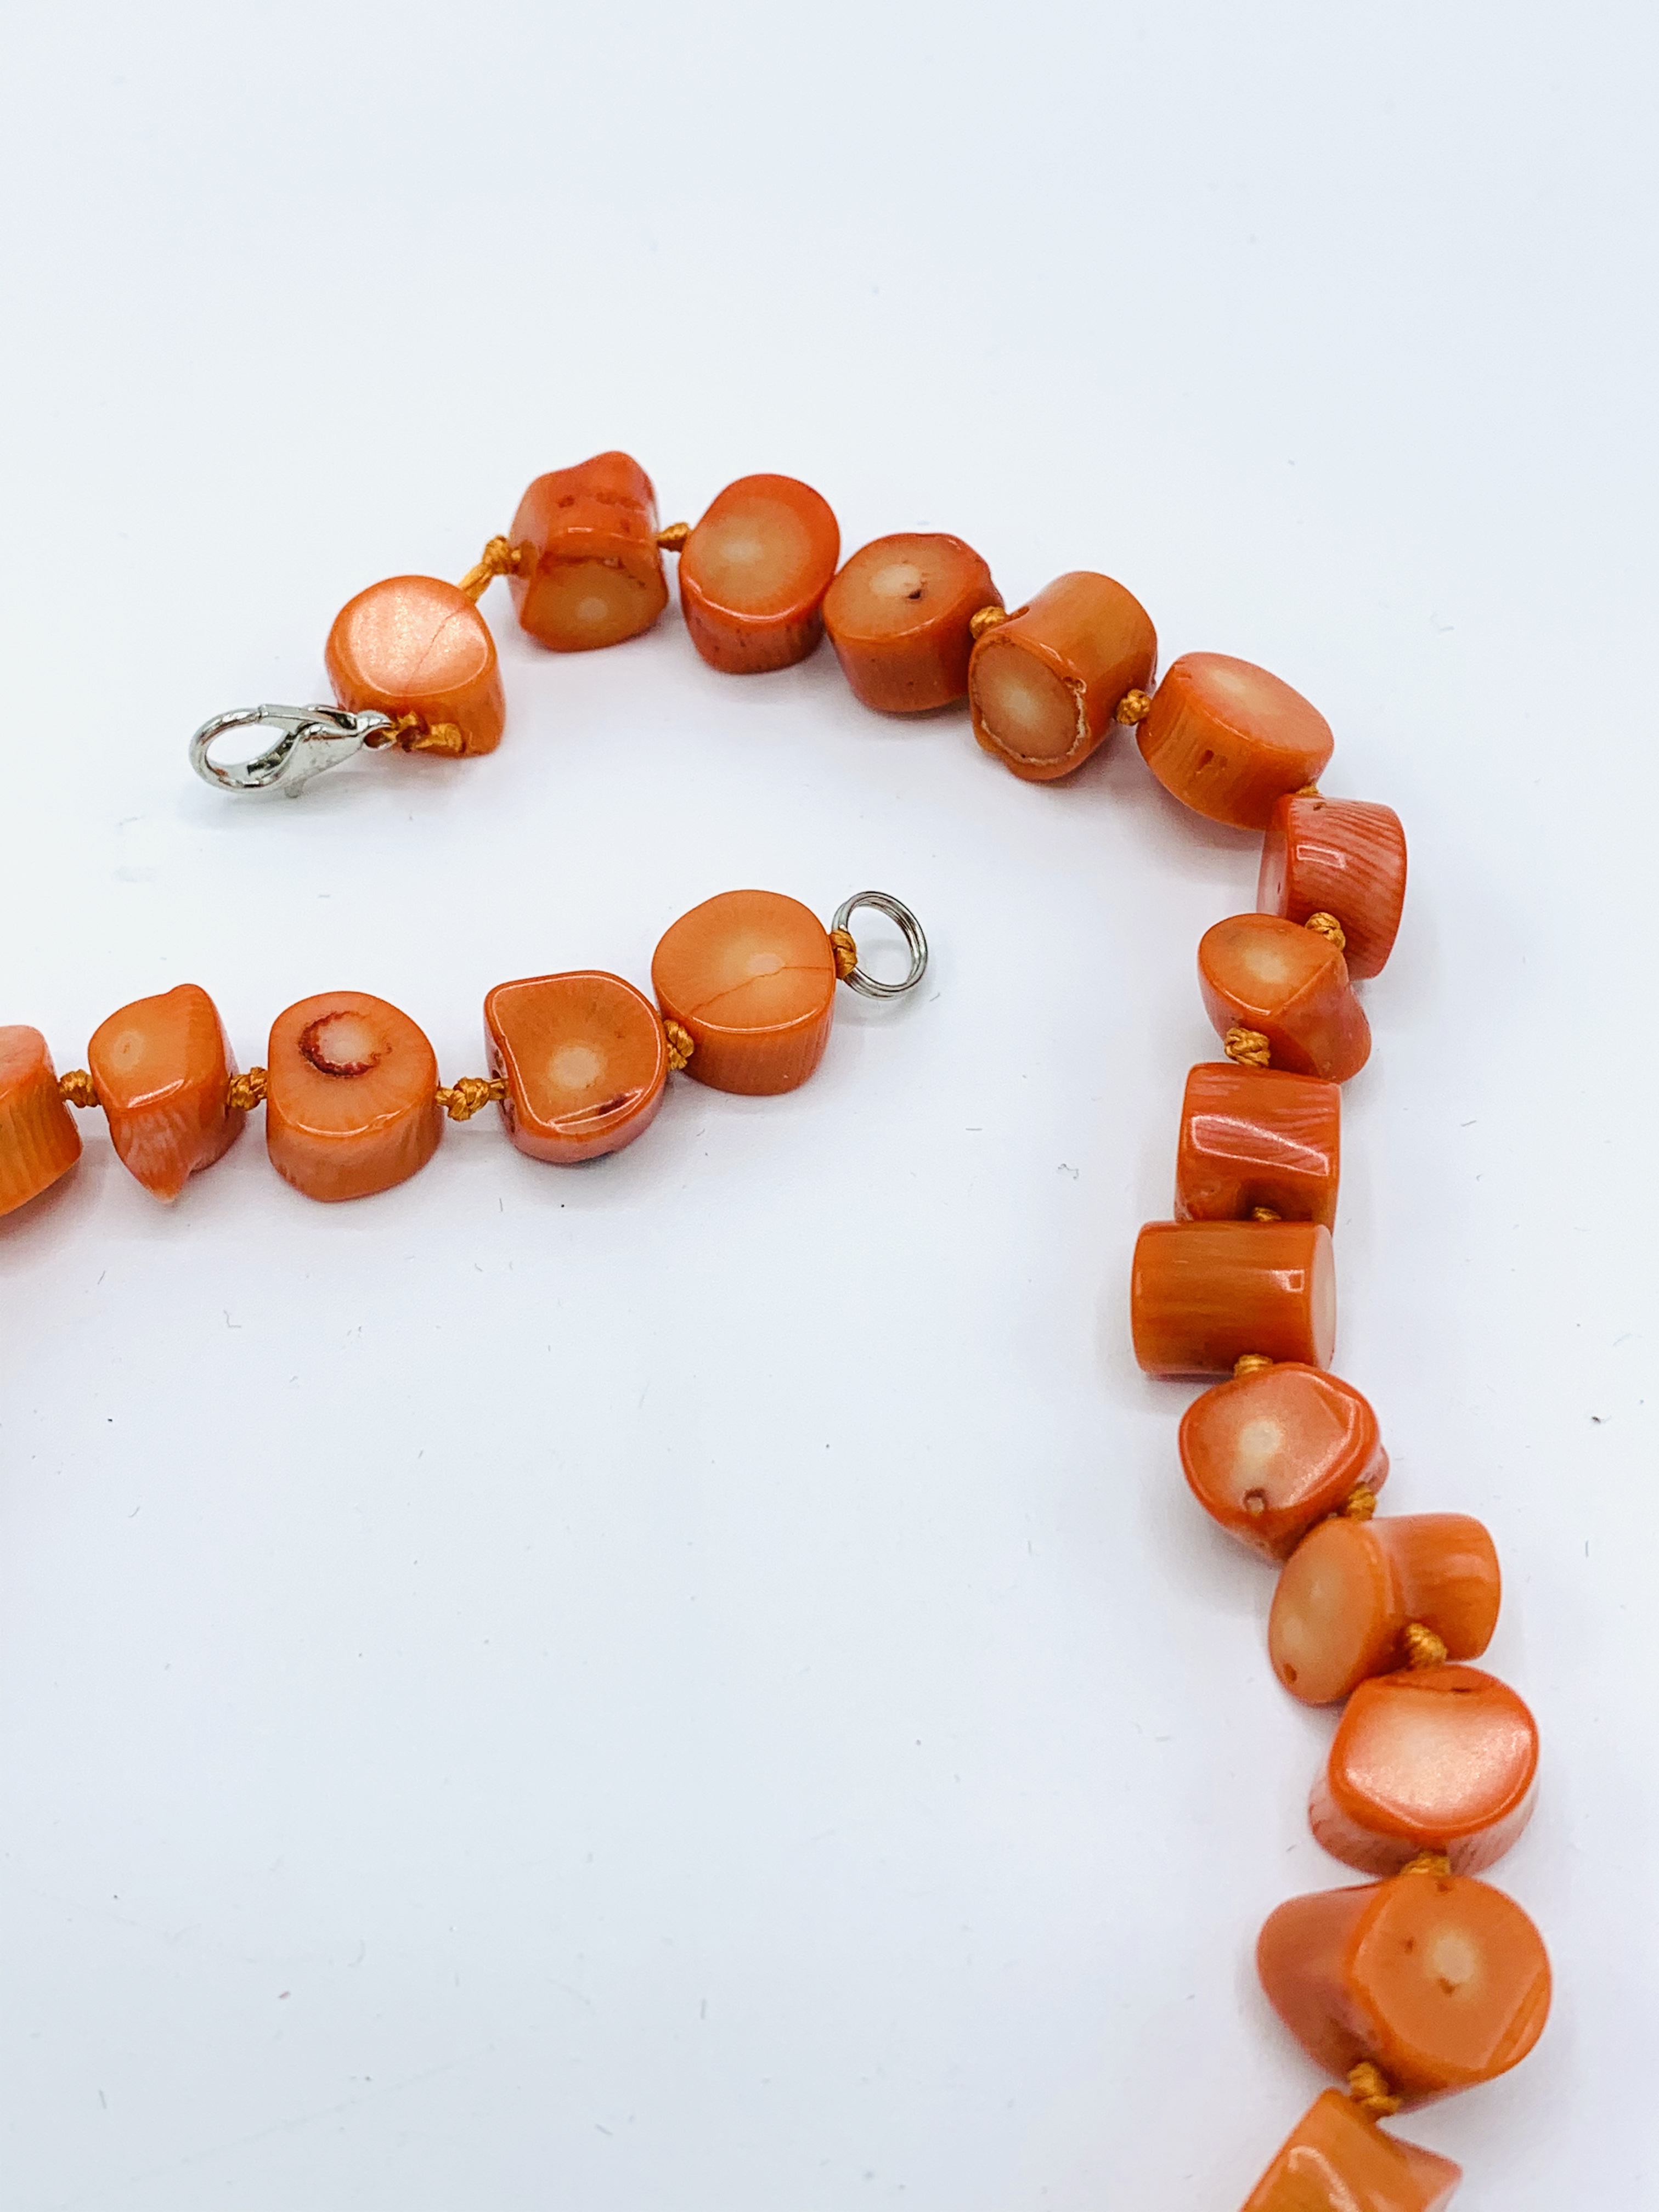 Coral coloured necklace. - Image 4 of 4